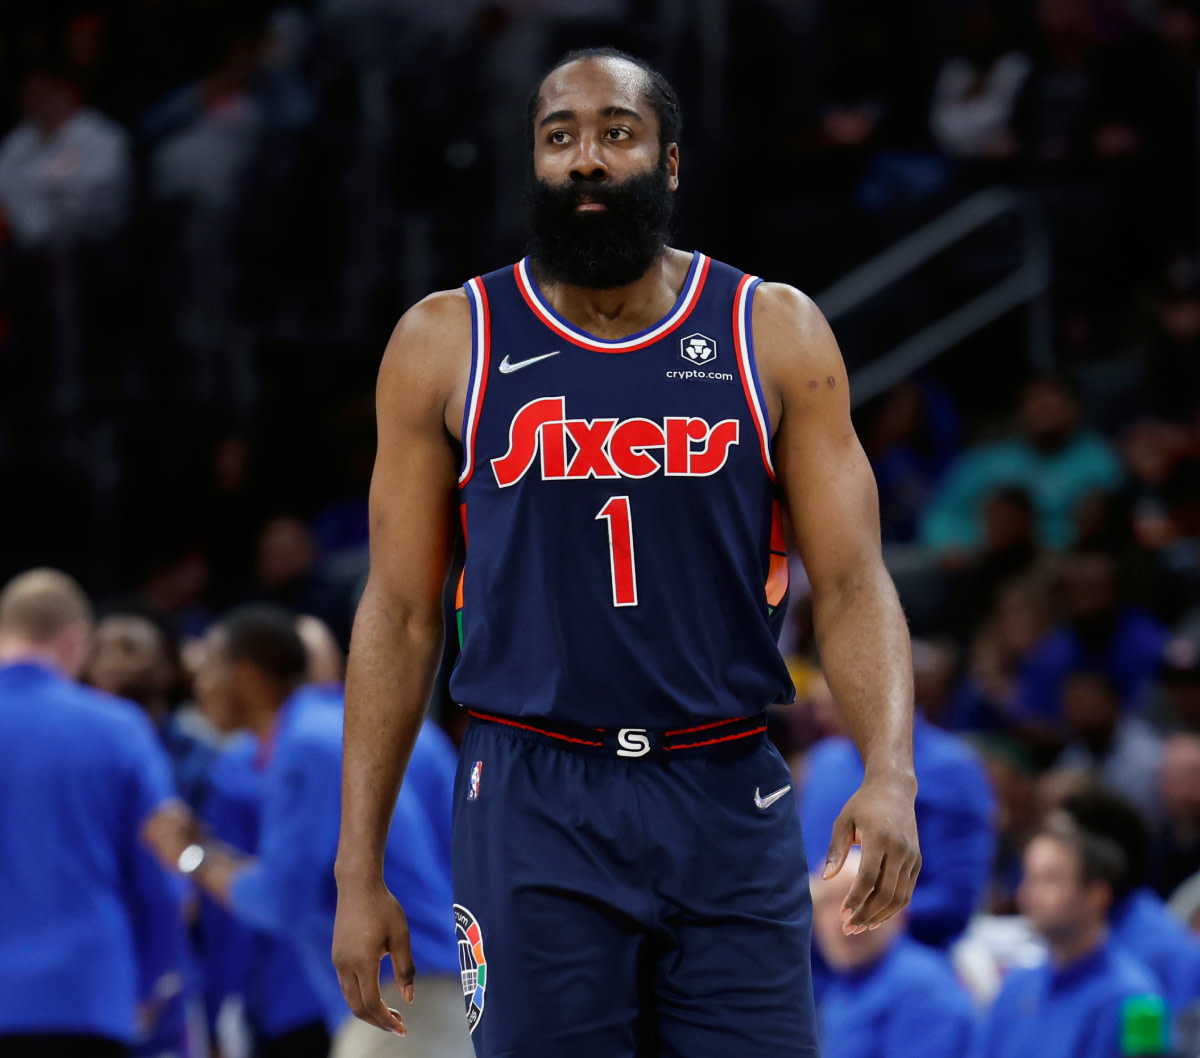 Shaquille O'Neal Says James Harden Needs To Win A Championship: "As A Player That's Been Touted As Great, You Want To Have A Championship Under Your Belt... He Needs It."